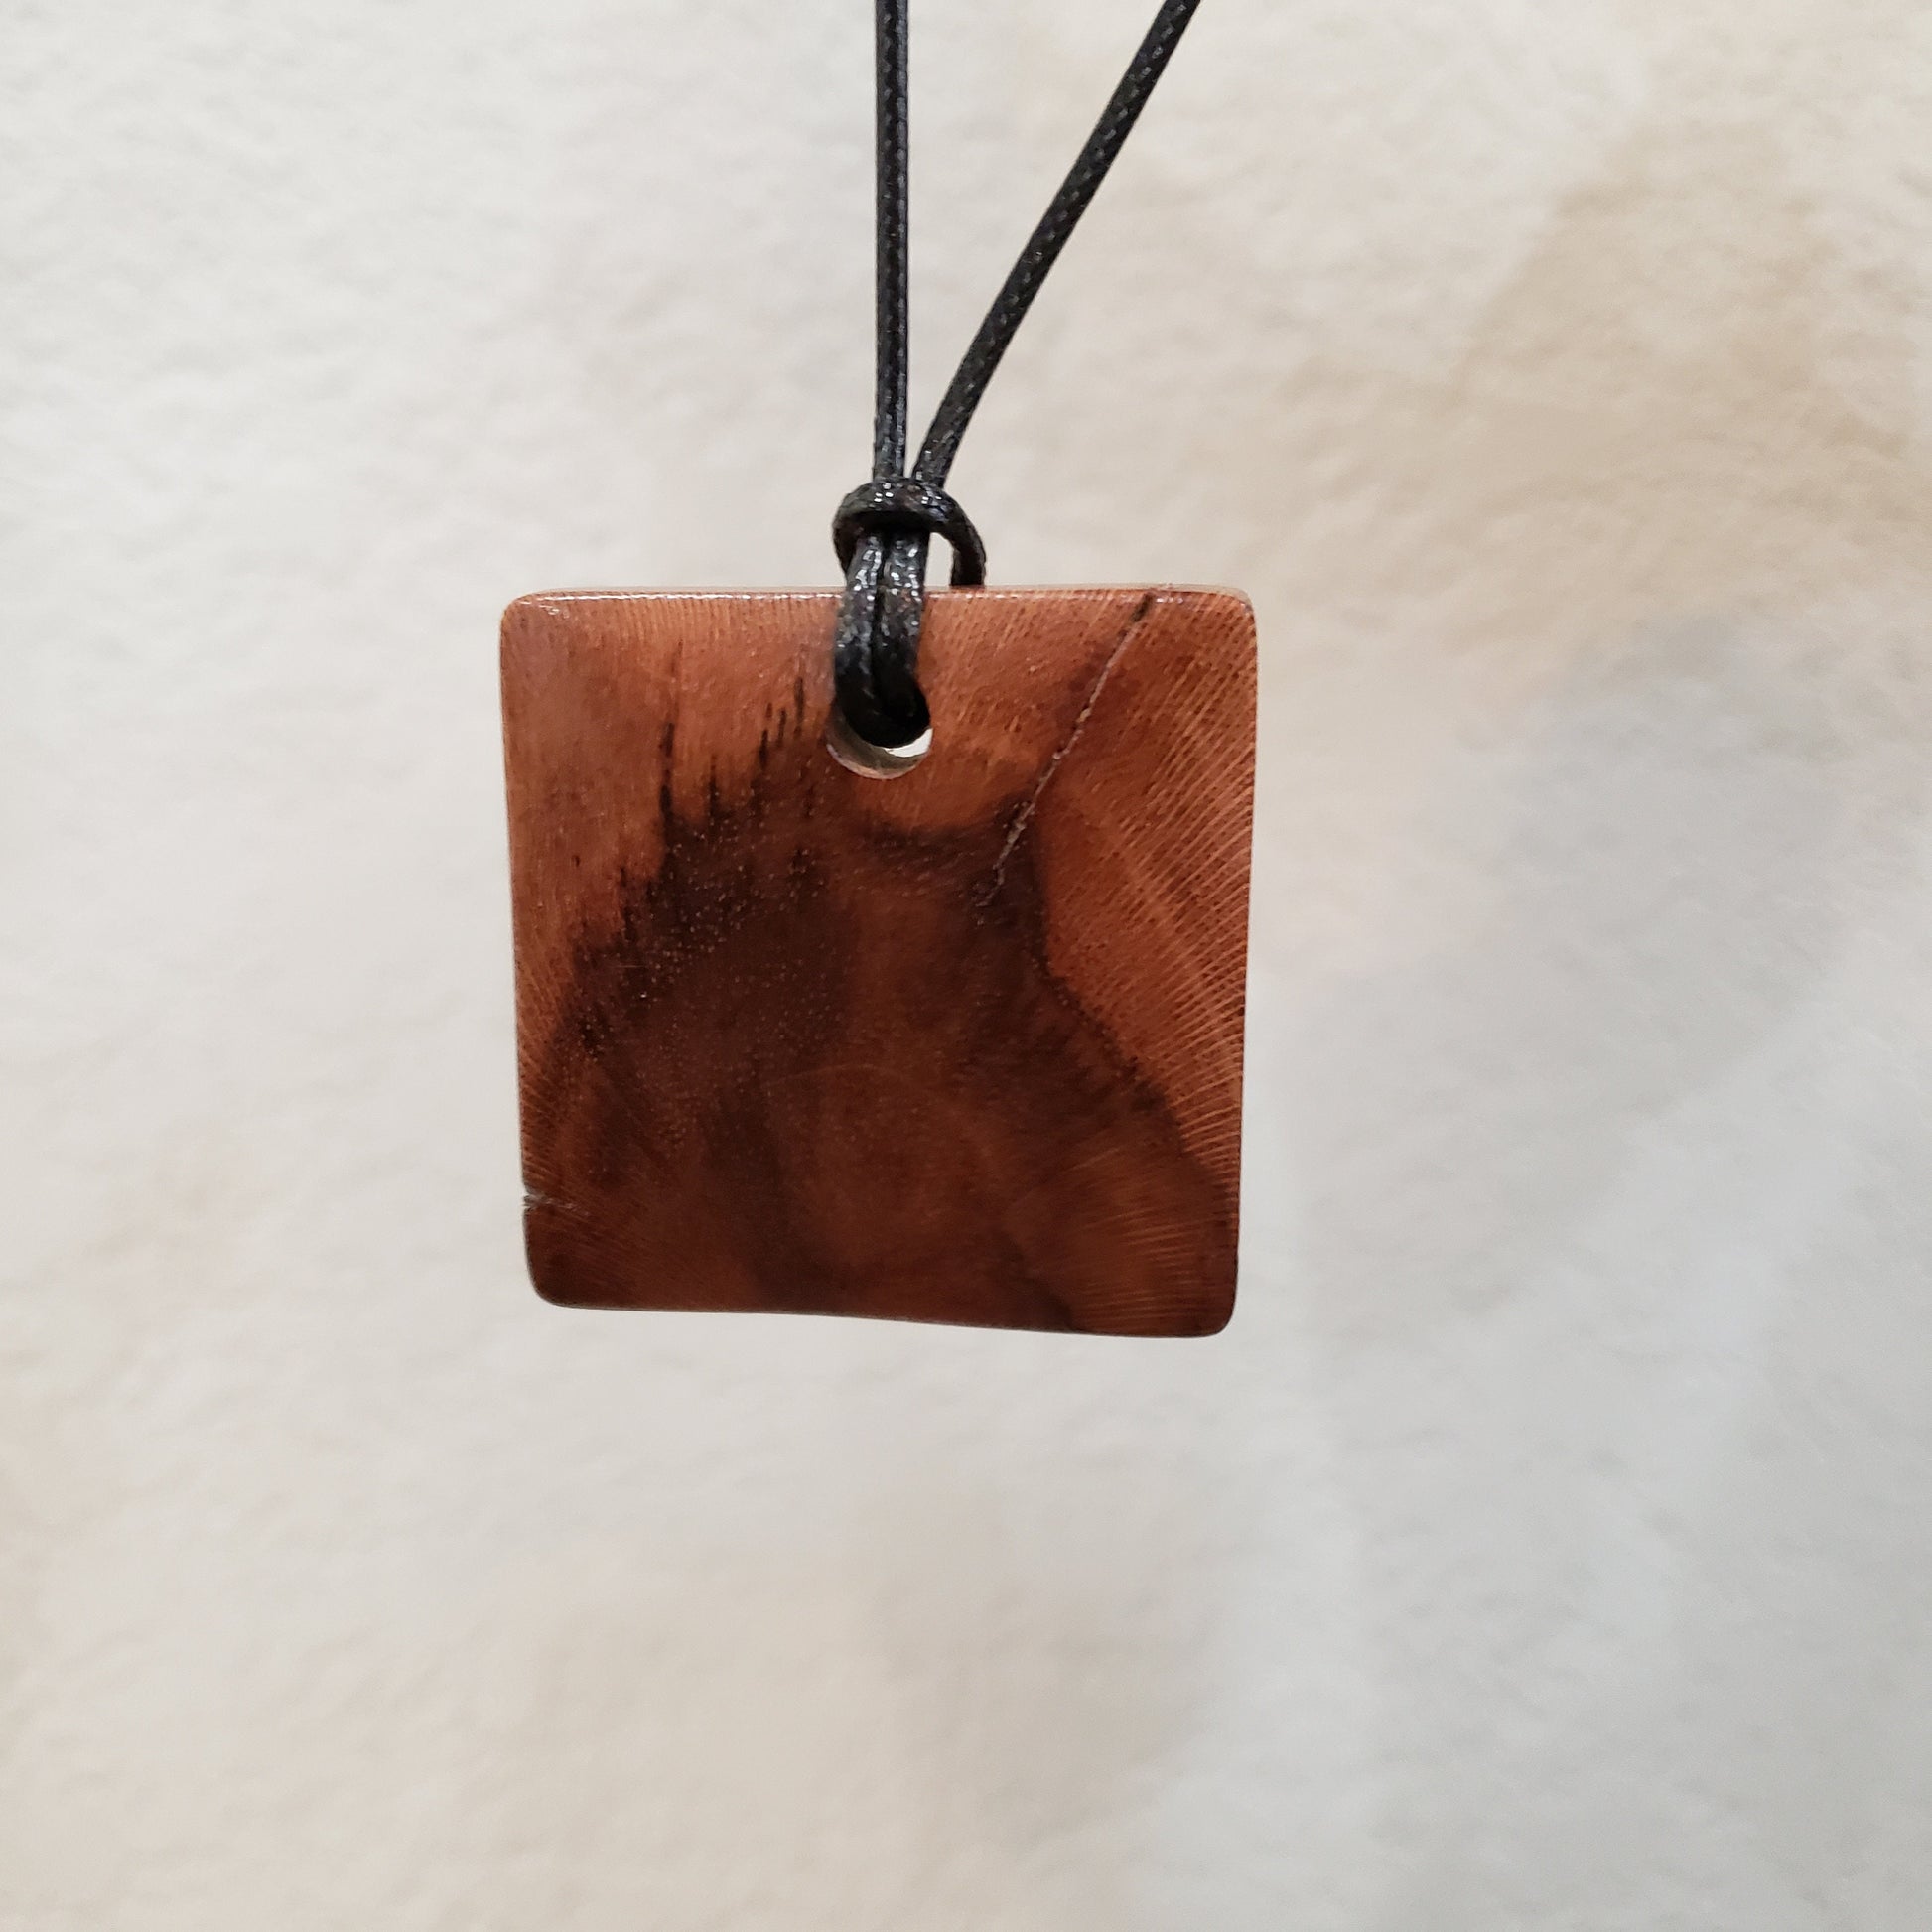 Grapevine Pendant Made from retired California grape vines 100121-40. 100% Recycled!